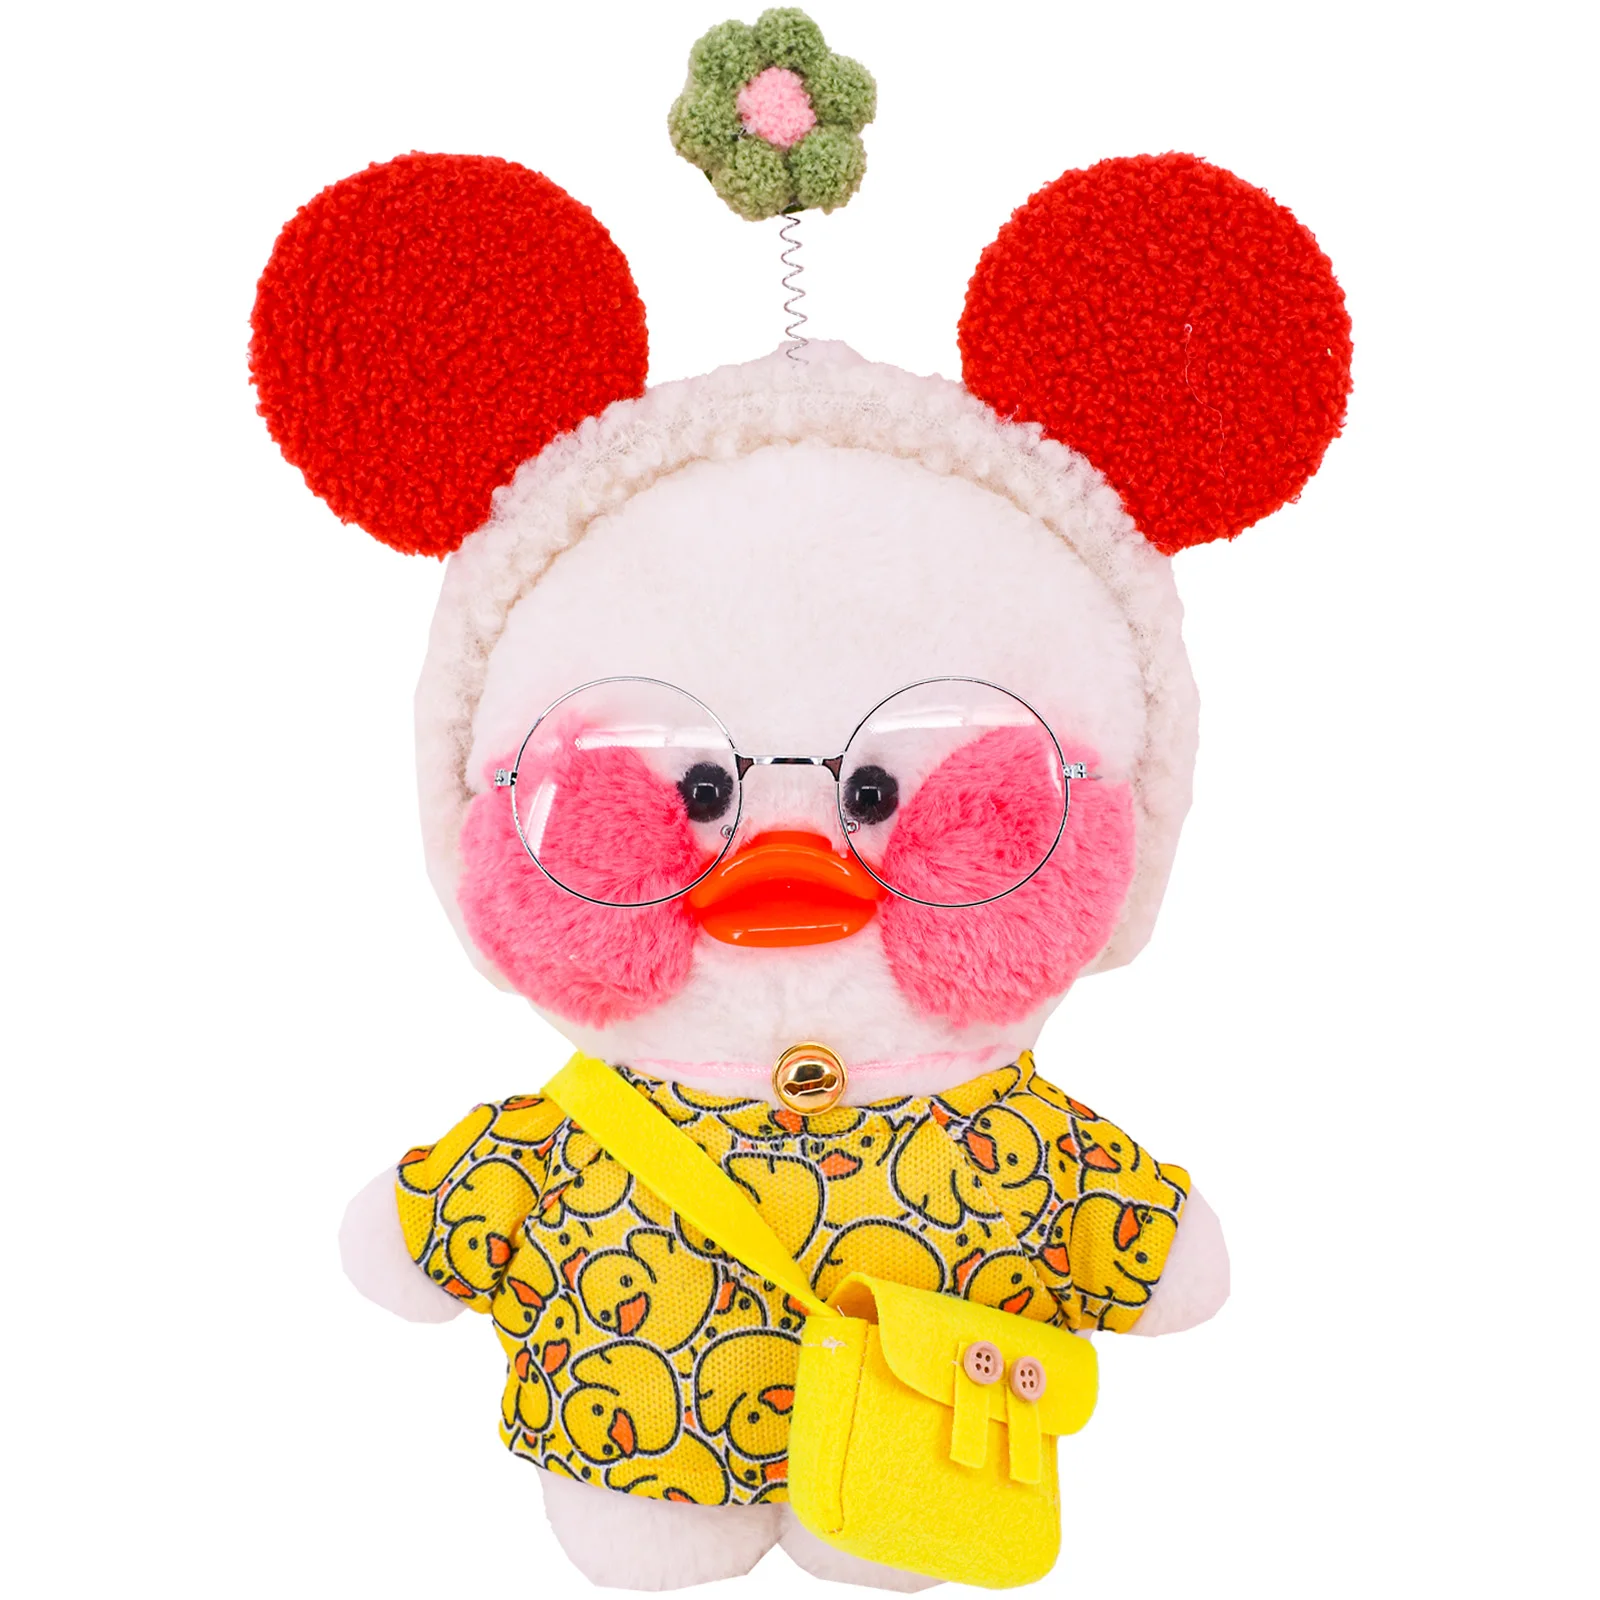 20 Cm Doll Clothes For Lalafanfan Clothes For Cute Yellow Plush Duck Sweater Glasses Plush Animal Doll Accessories images - 6